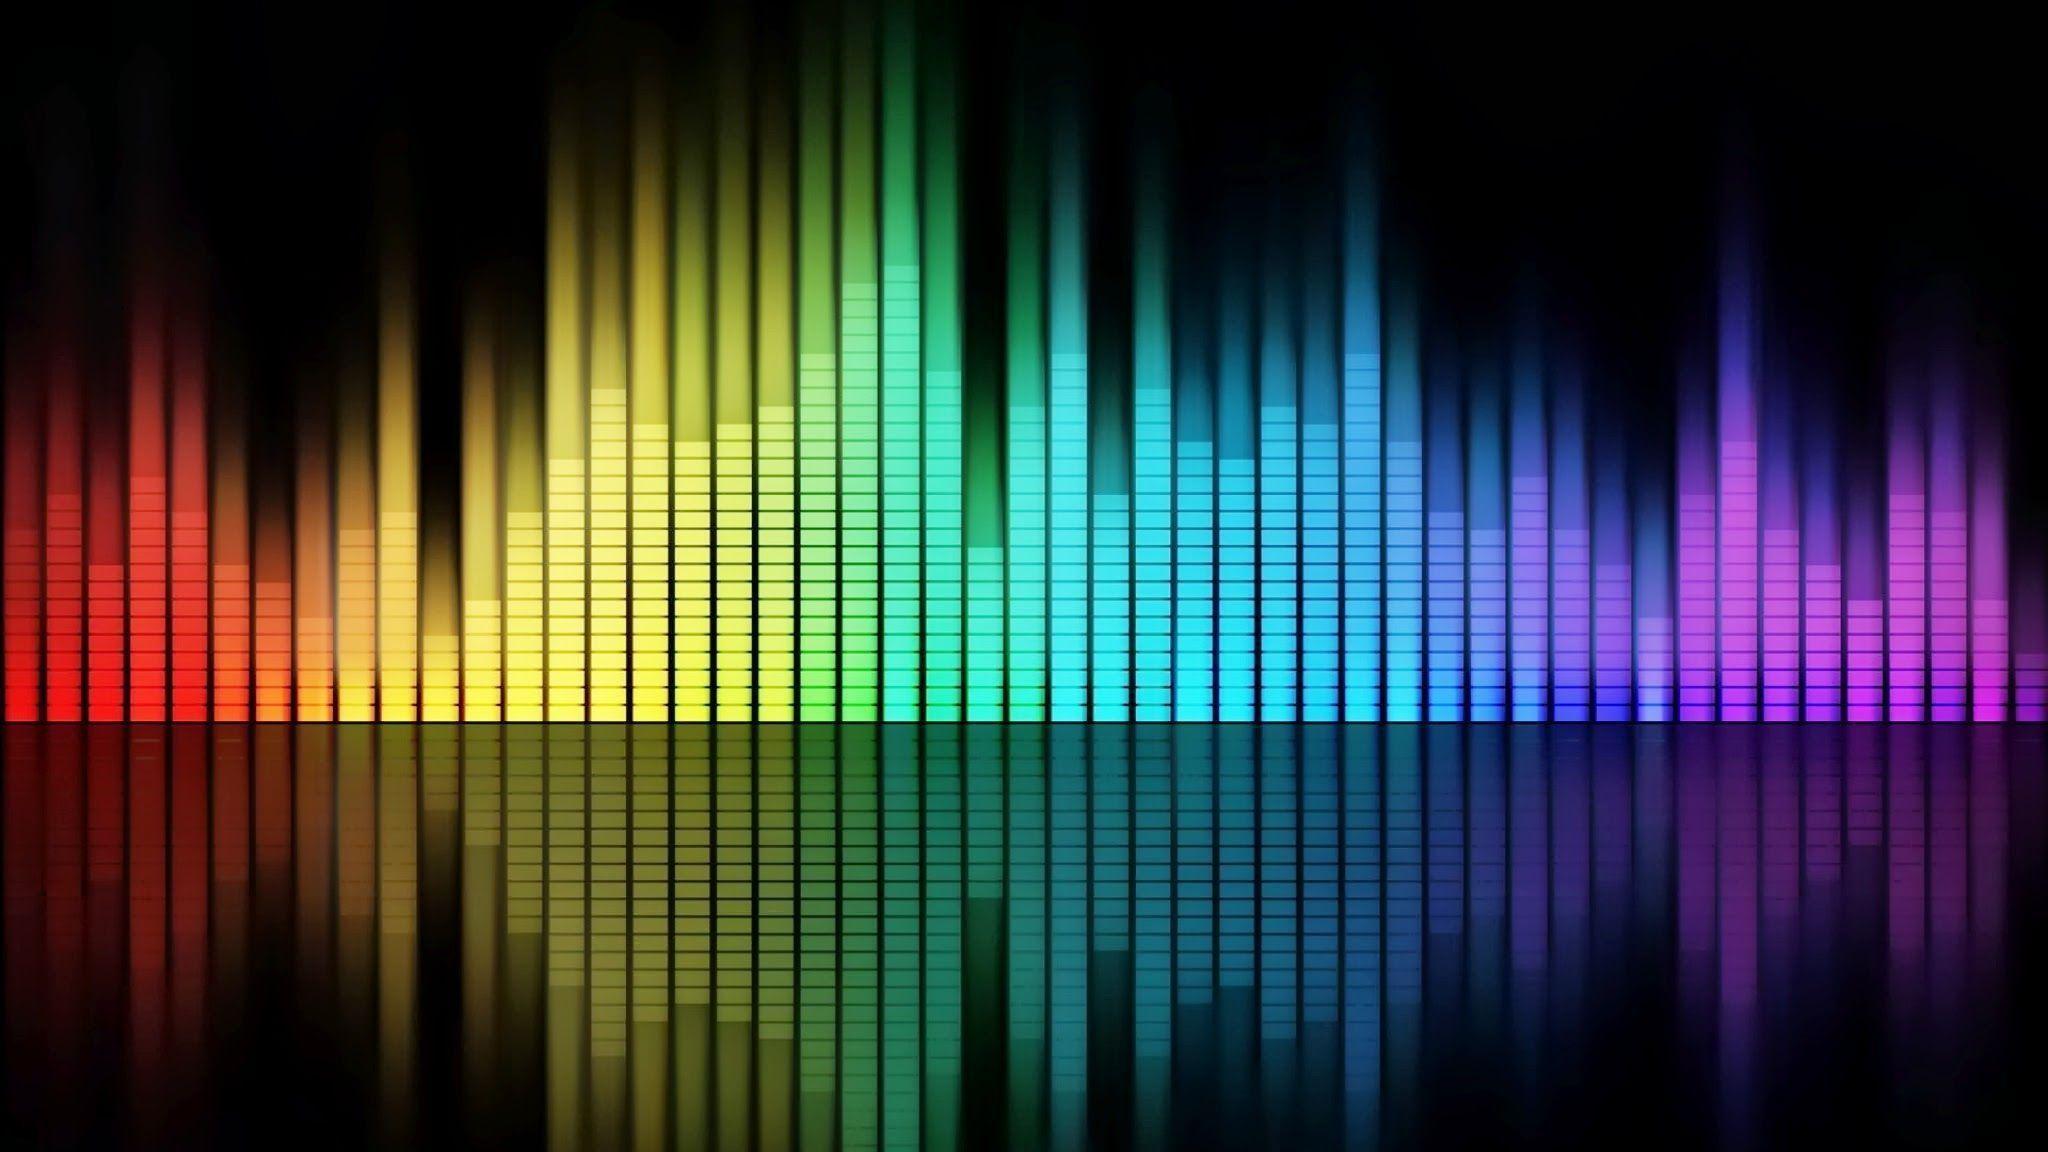 Wallpaper For > Animated Equalizer Wallpaper